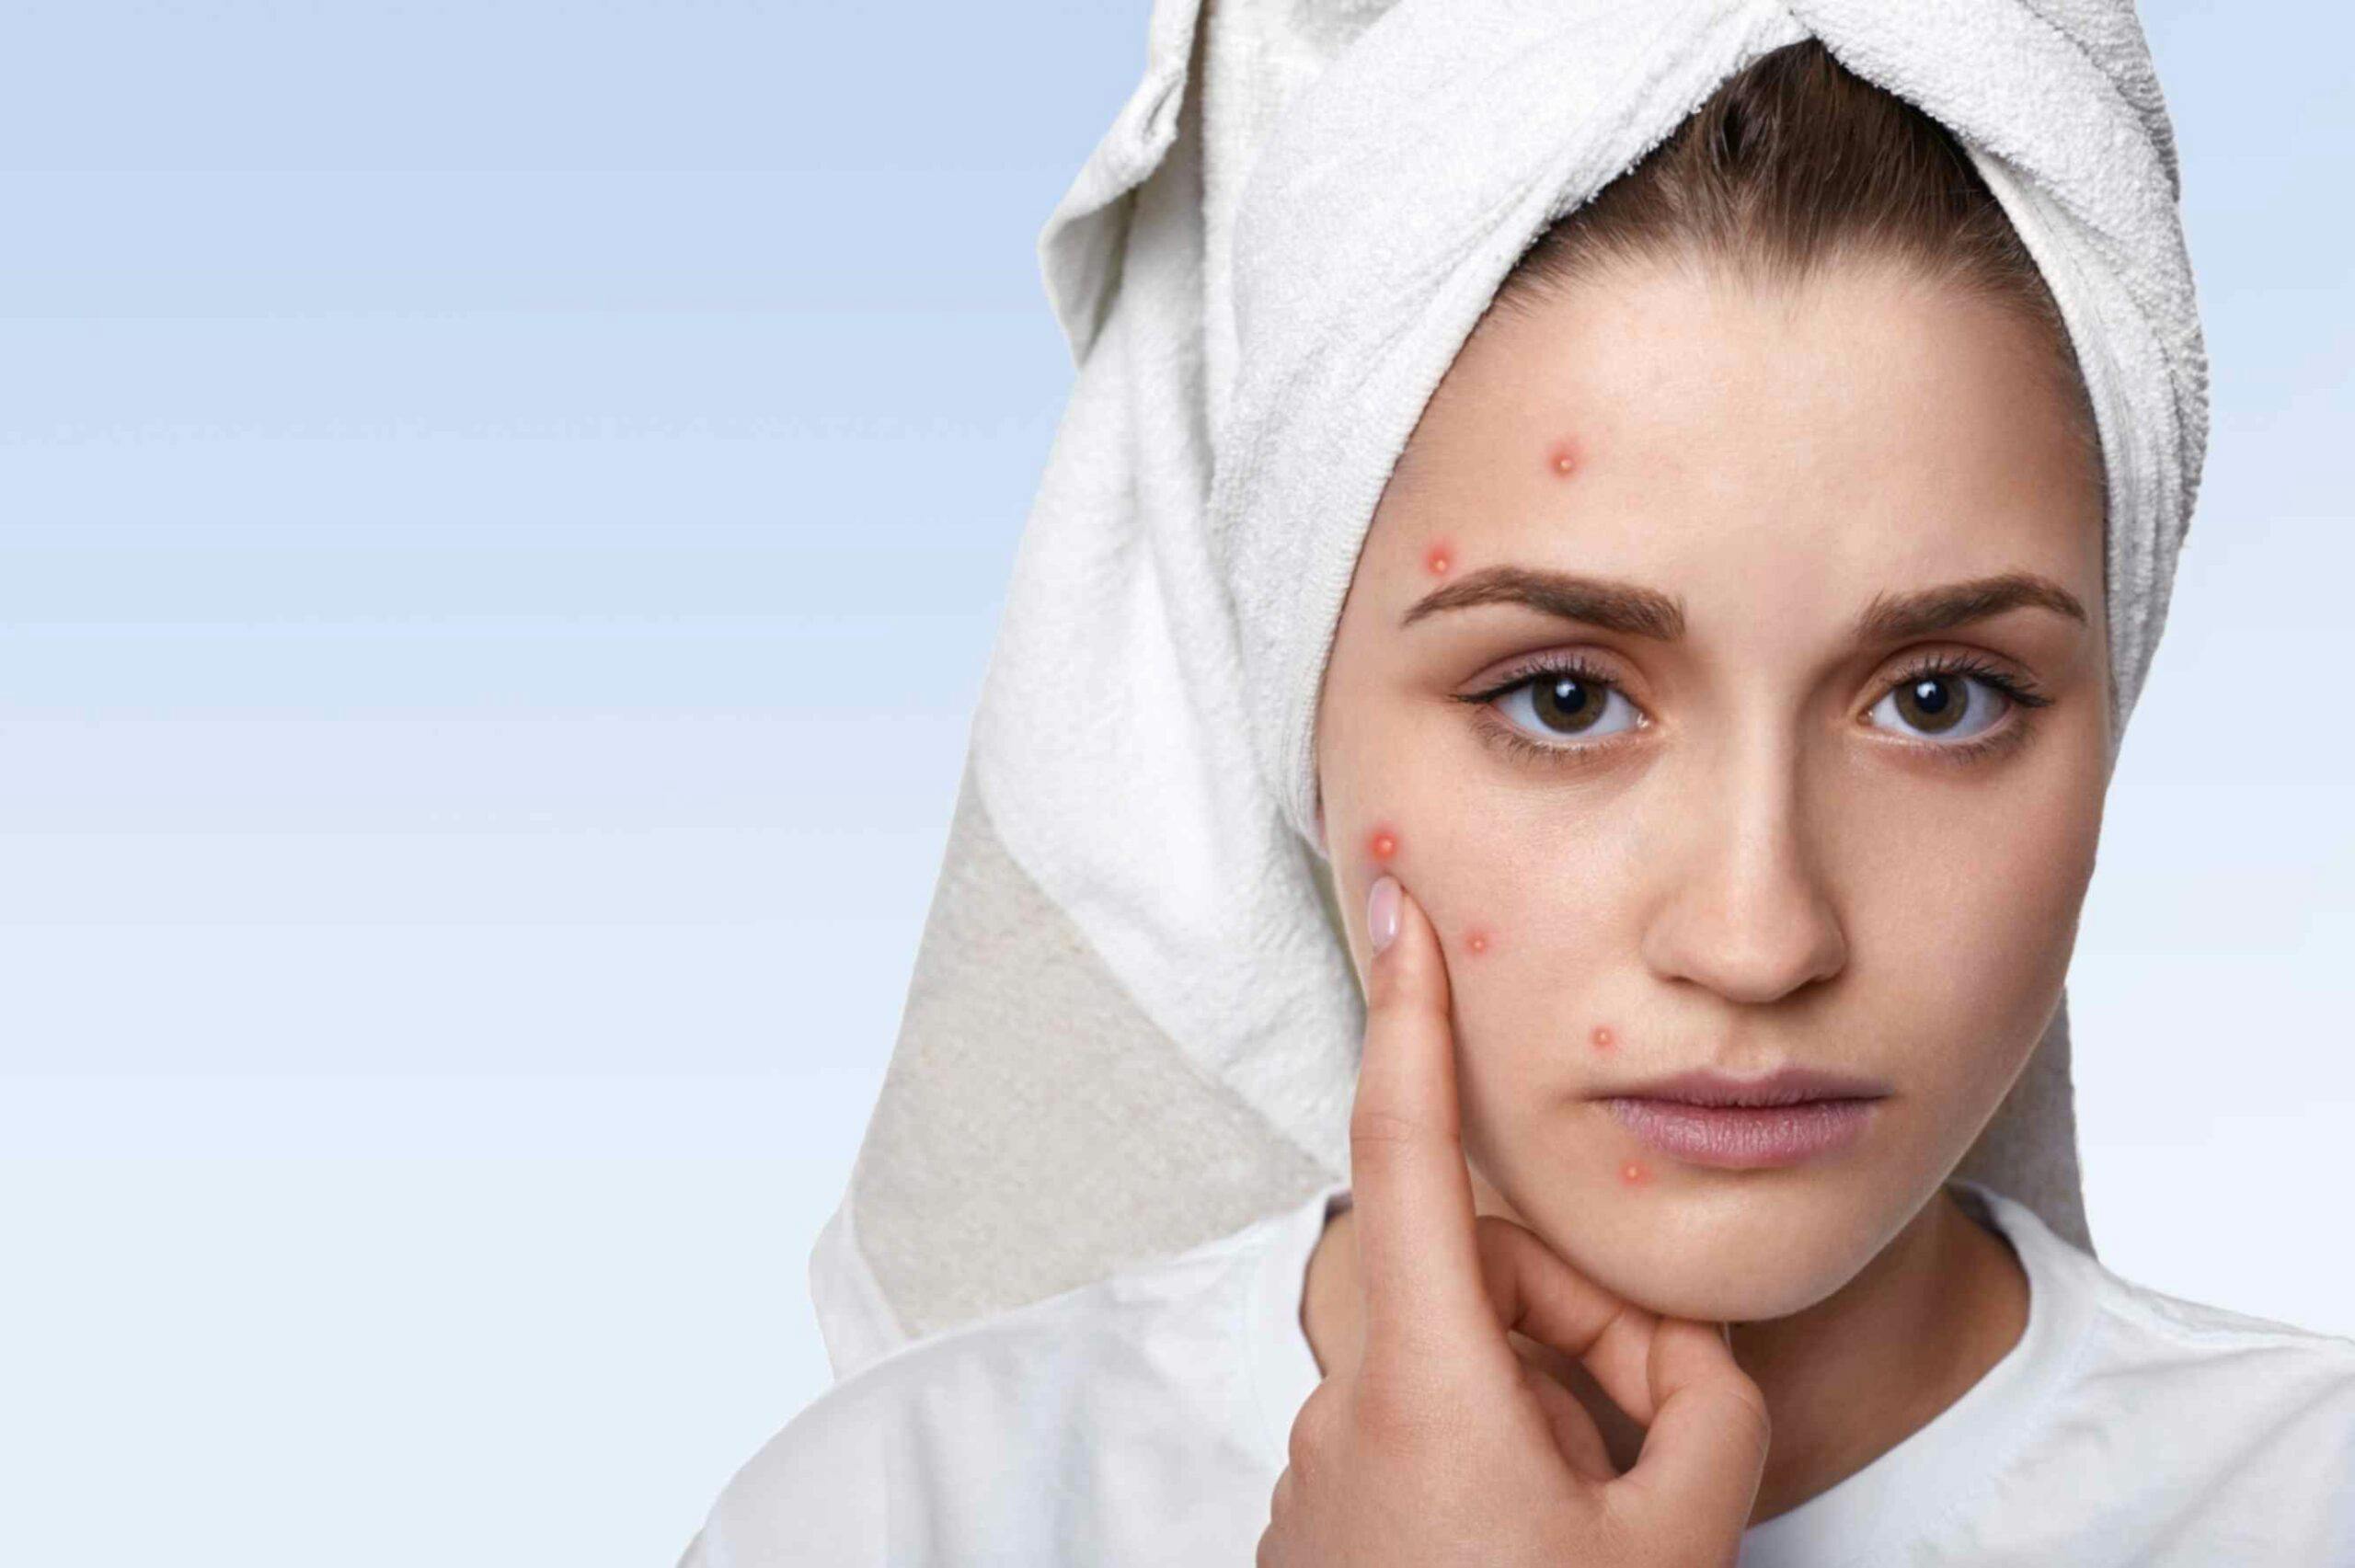 Acne Breakout: Causes & Solutions